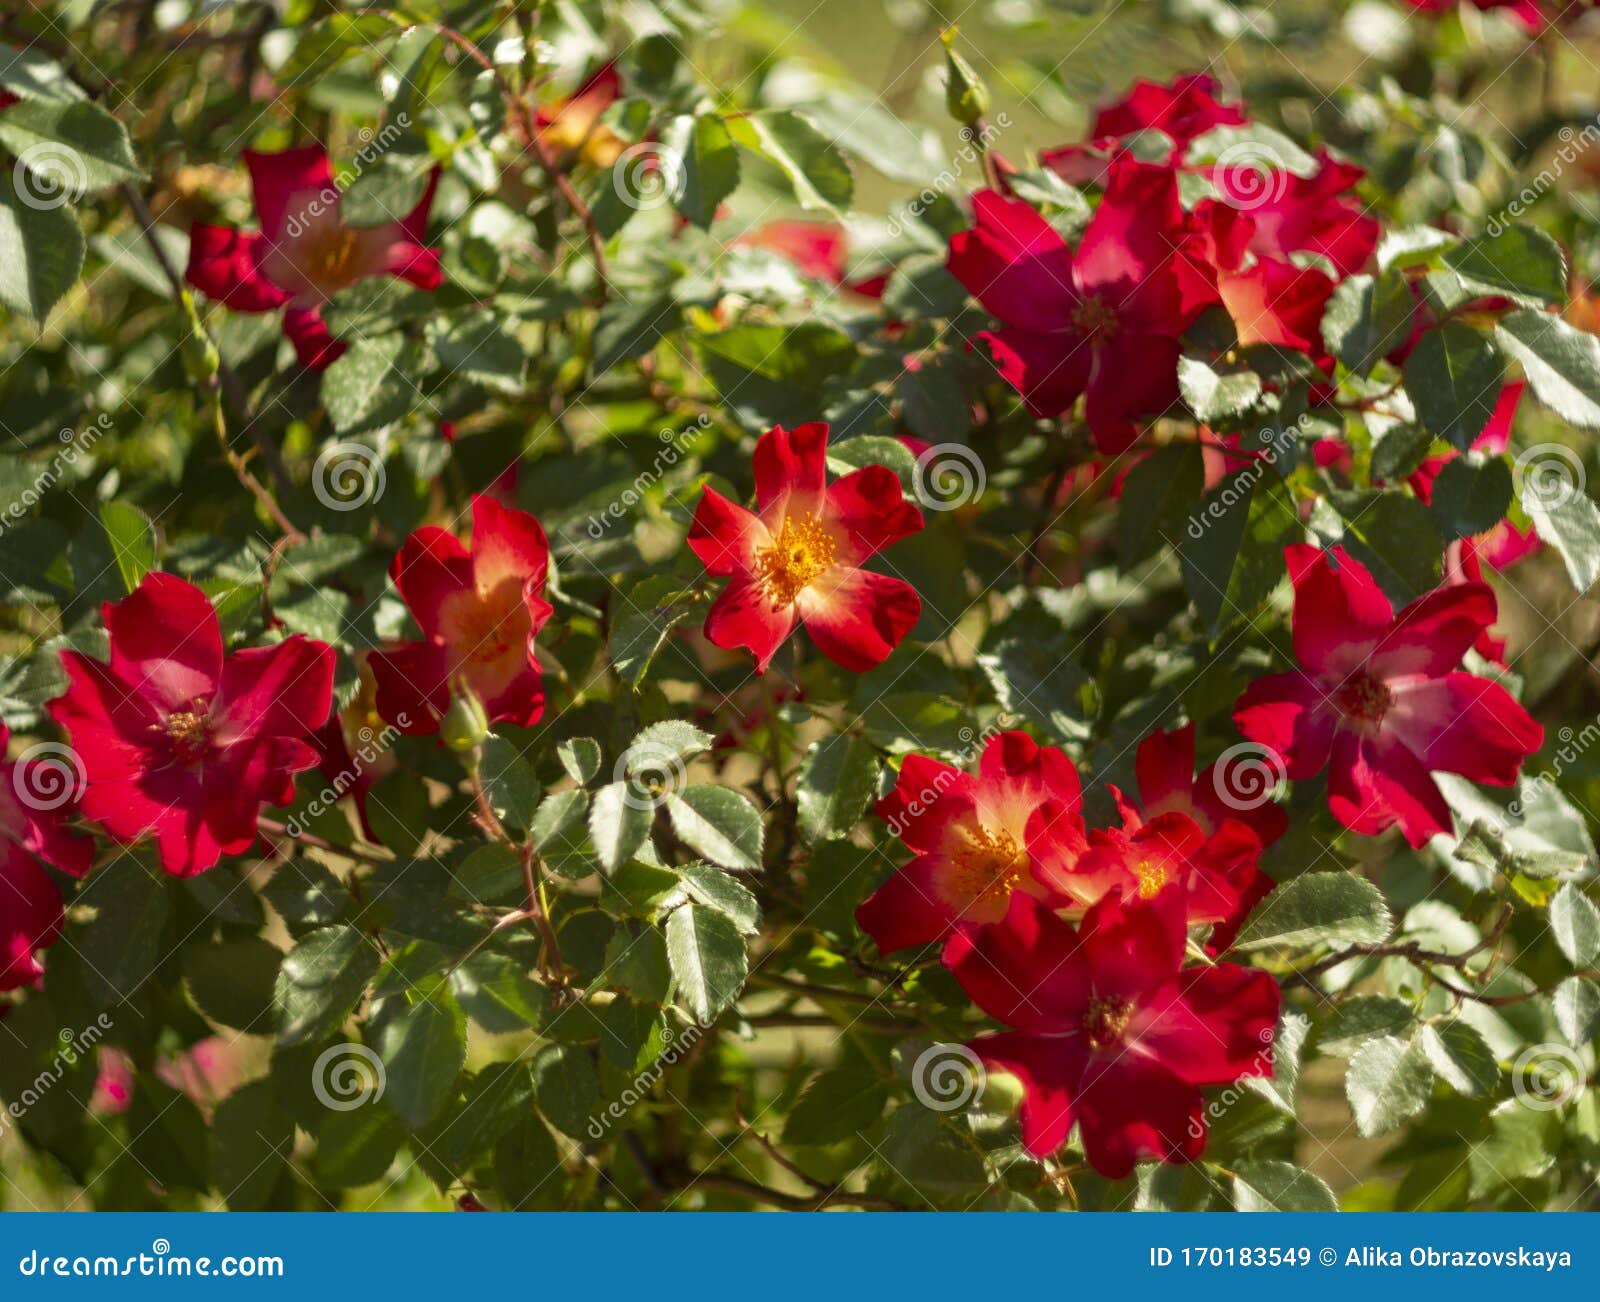 Beautiful Red Rose Flower on a Sunny Warm Day Stock Image - Image of ...